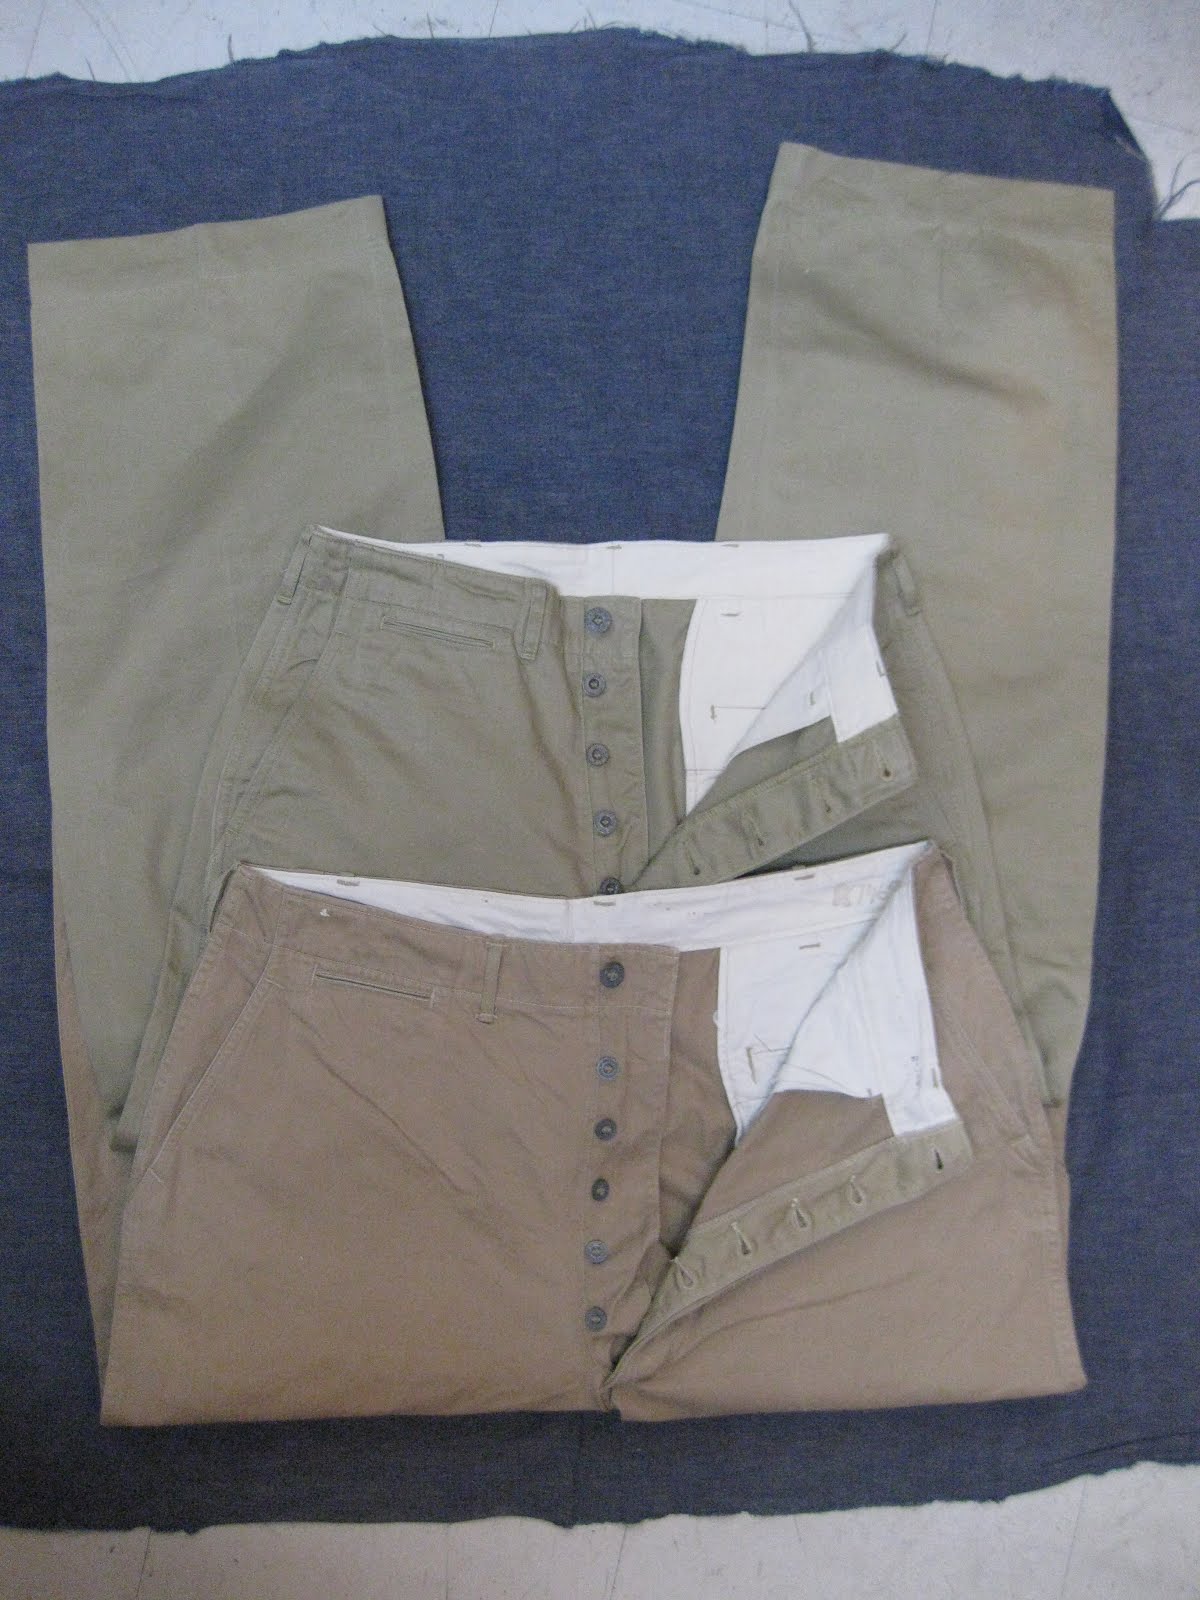 30's～　U.S.ARMY　　　　　　　　　　　　　　　　CHINO PANS　WITH　　　　　　　　　　　　　　　　METAL BUTTON　　　　　　　　　　　　　×2ps.